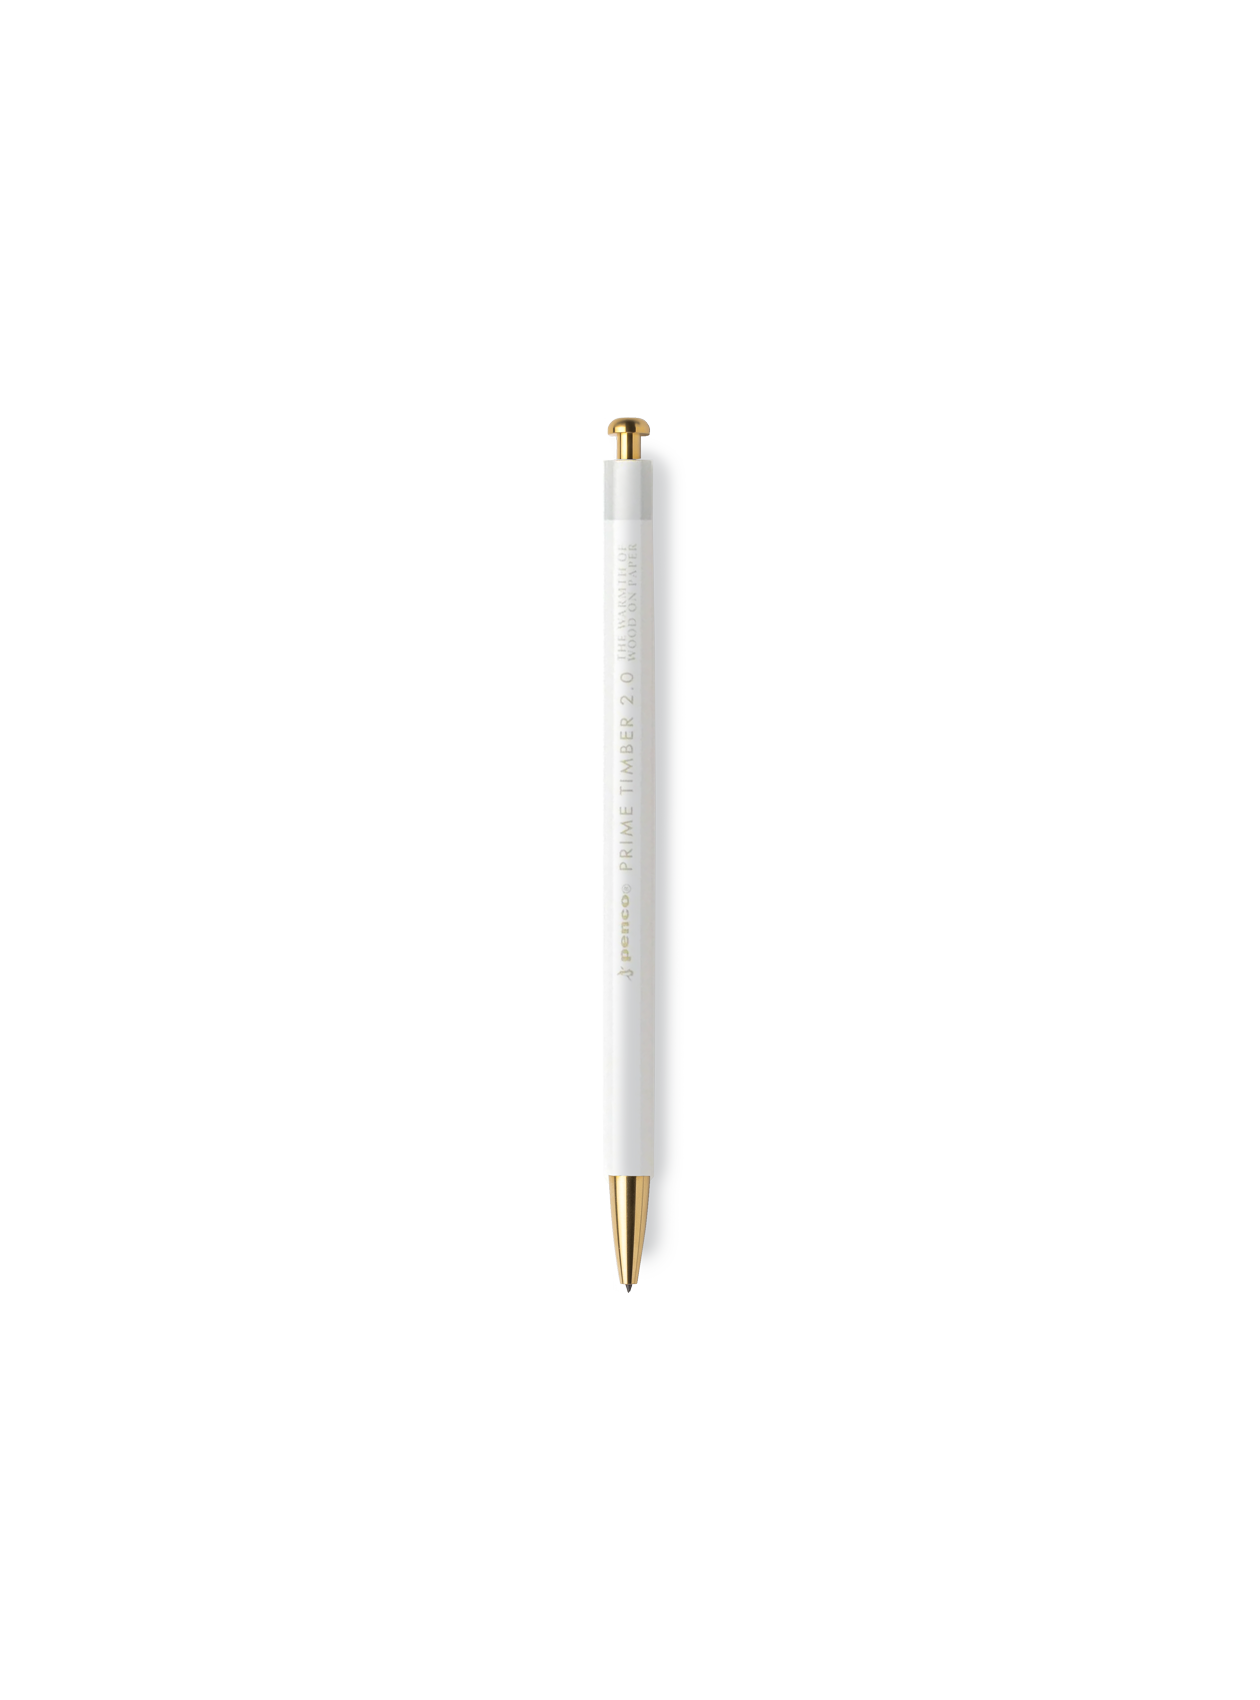 Prime Timber Brass Mechanical Pencil in White || White